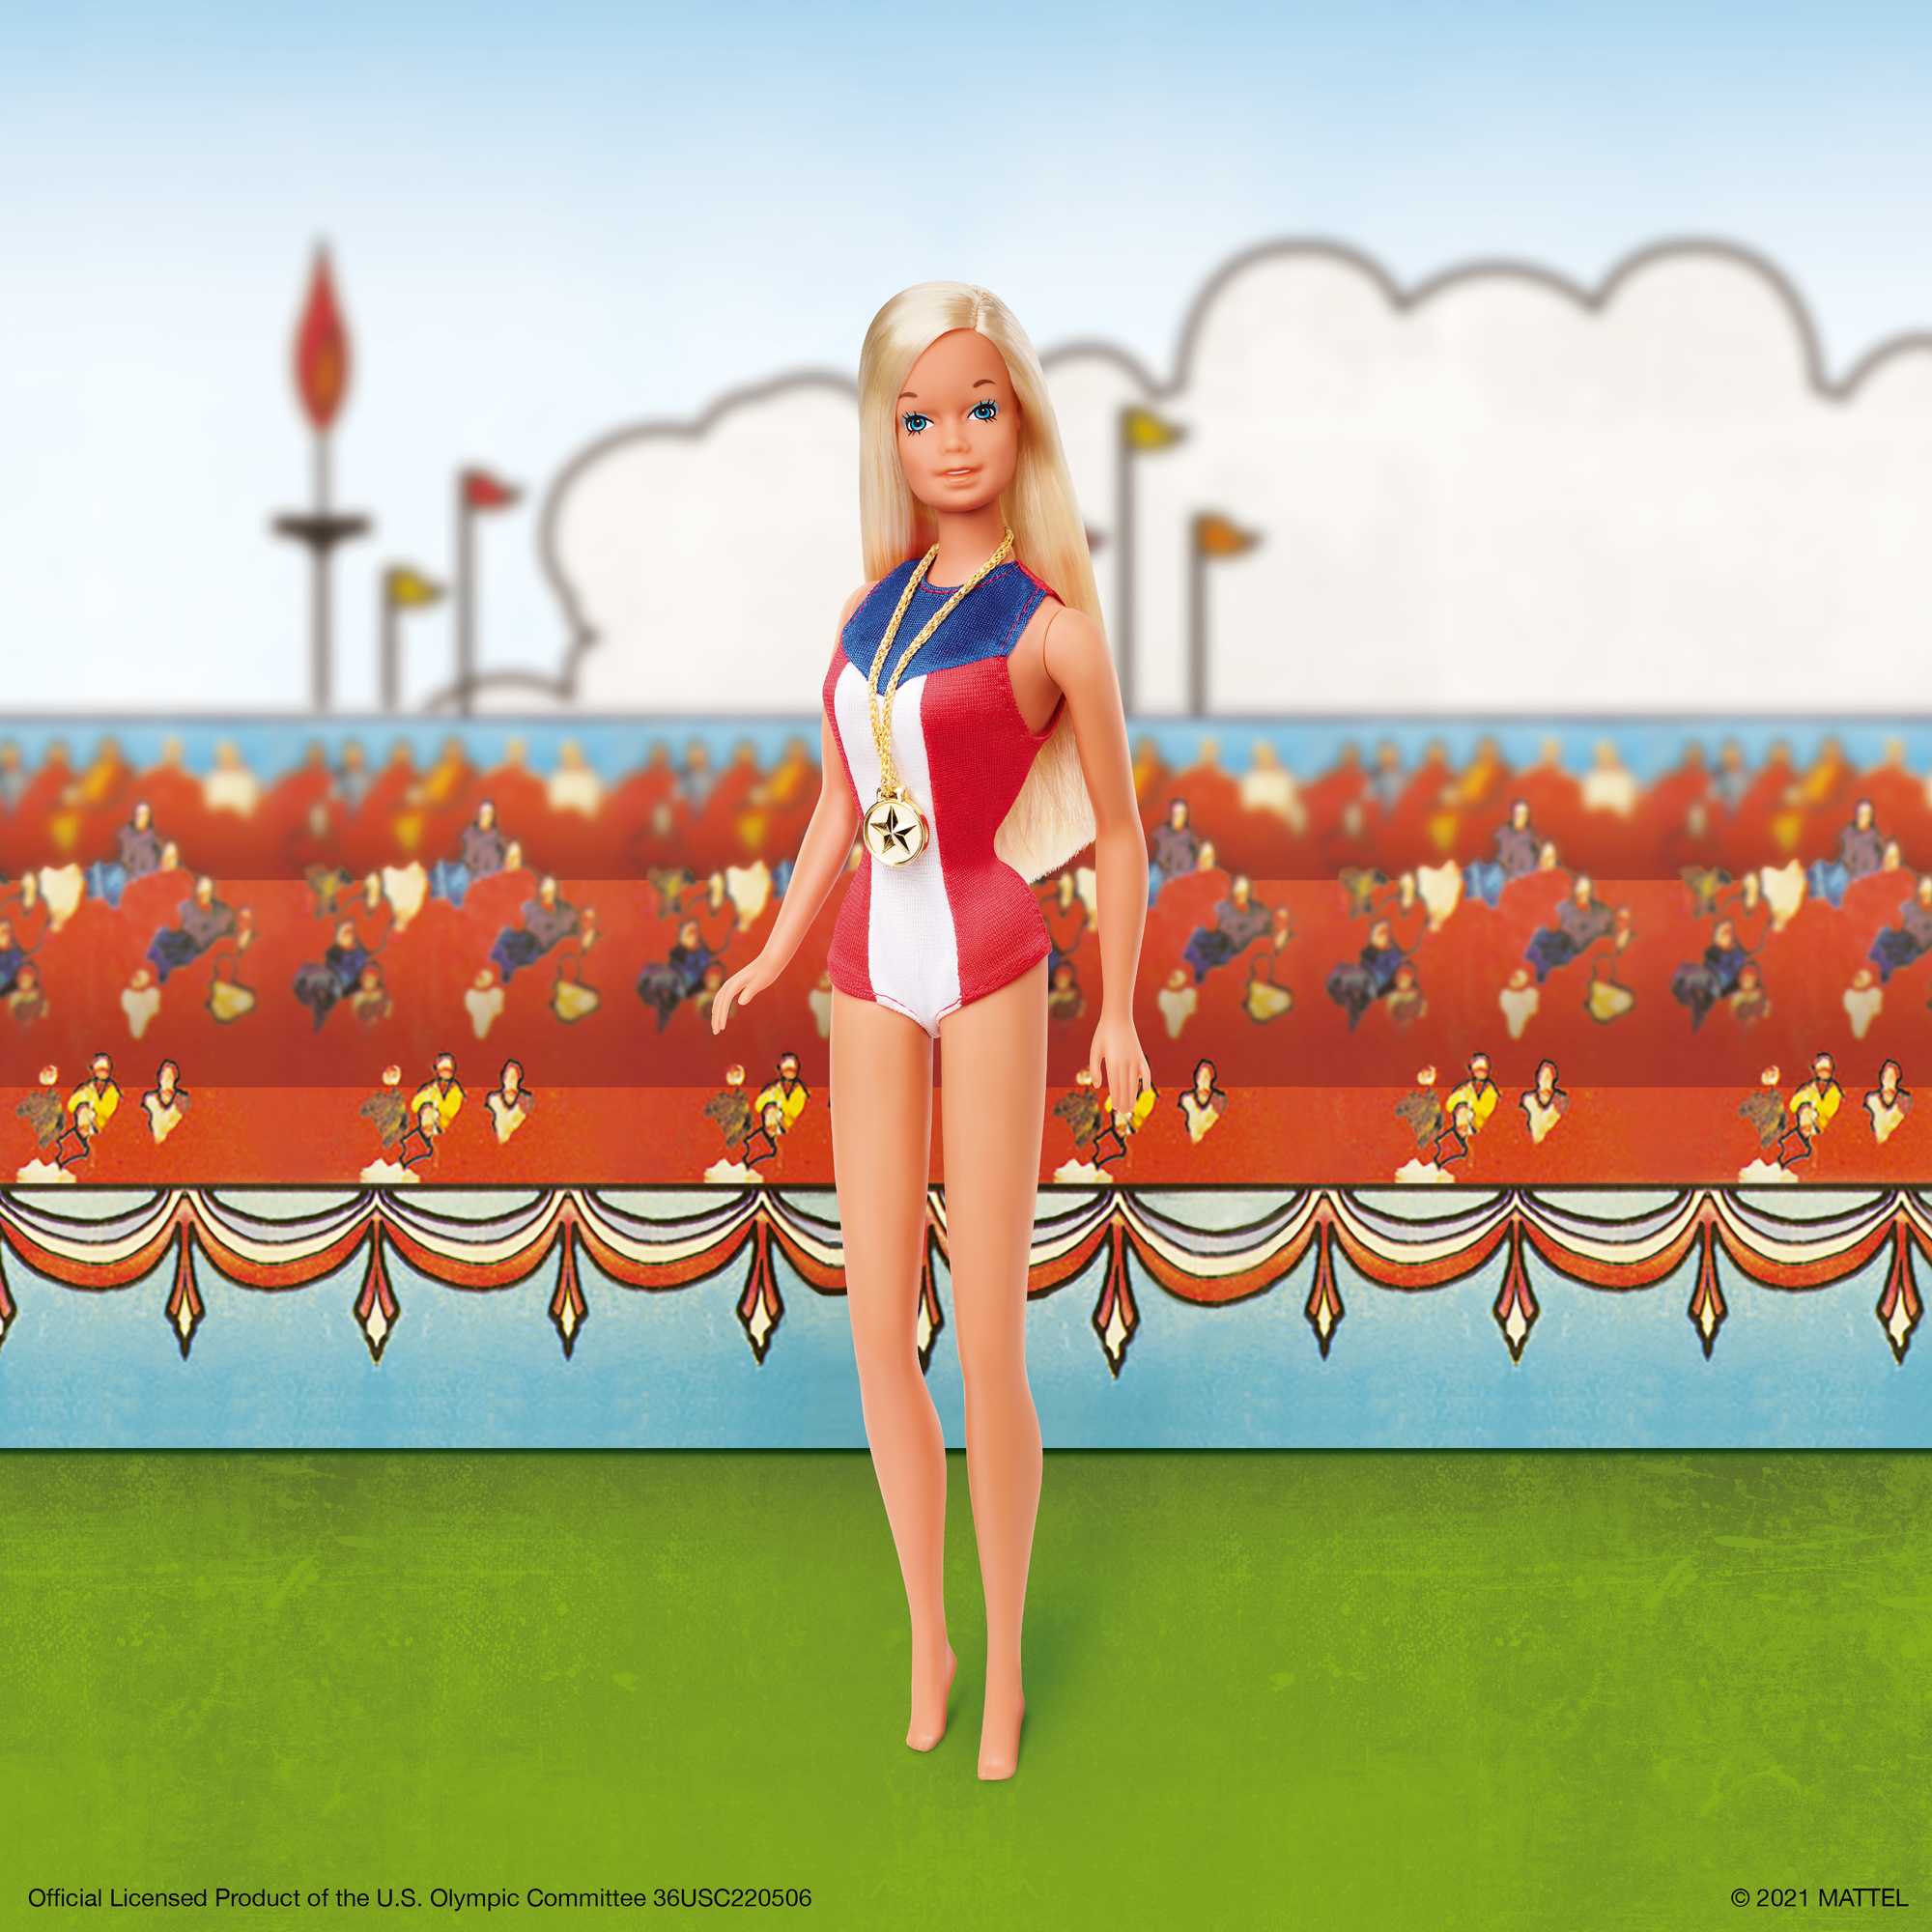 Barbie Signature 1975 Gold Medal Reproduction Barbie Doll with Red, White & Blue Leotard - image 3 of 7